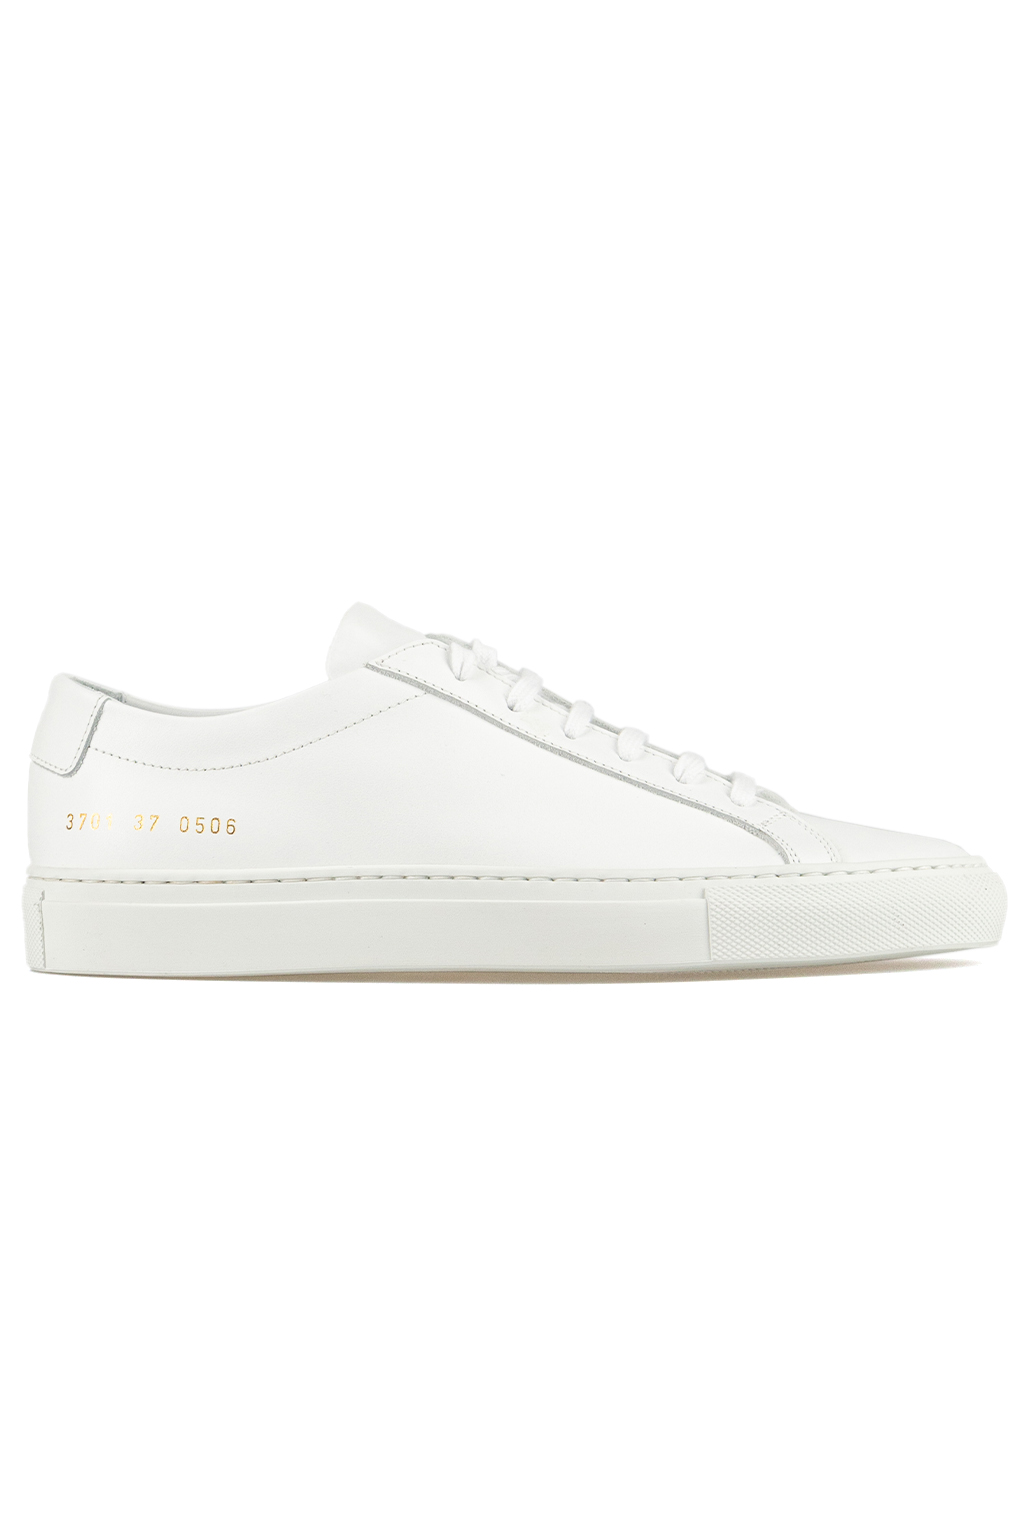 Common Projects Toronto